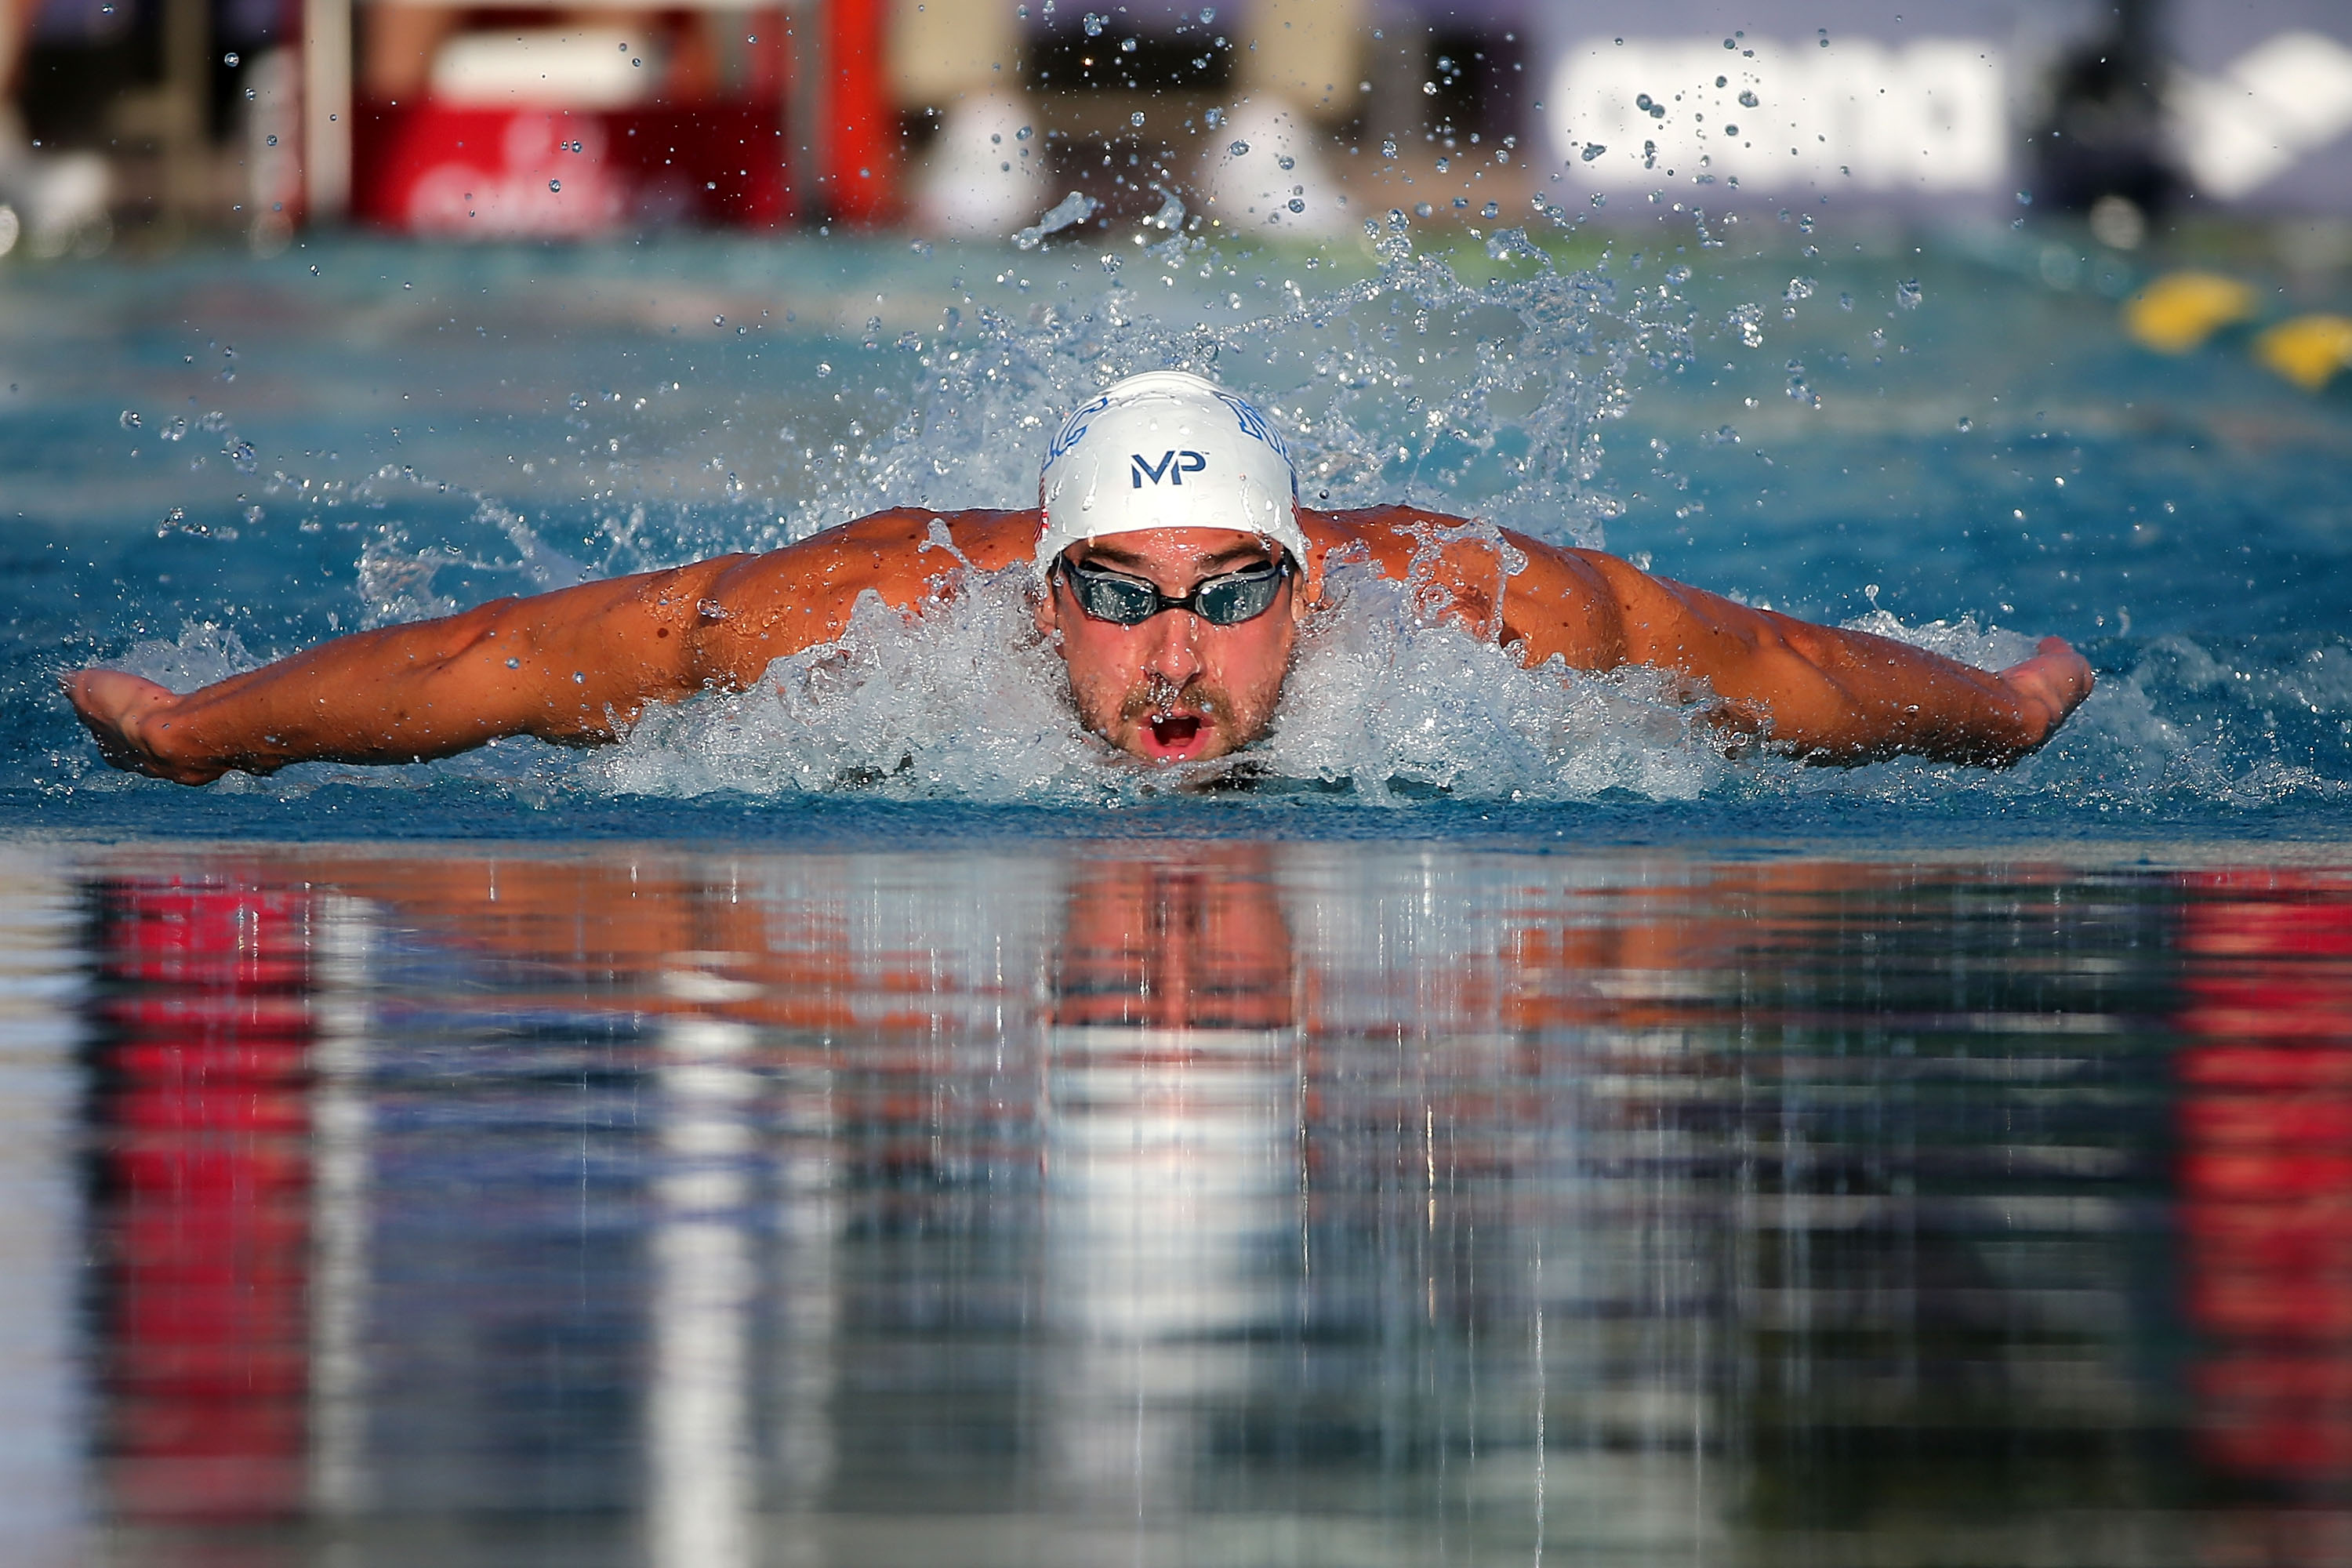 Michael Phelps competes in the finals of the men's 200 meter individual medley at the Skyline Aquatic Center on April 16, 2016 in Mesa, Arizona.  Chris Coduto&mdash;Getty Images (Chris Coduto&mdash;Getty Images)